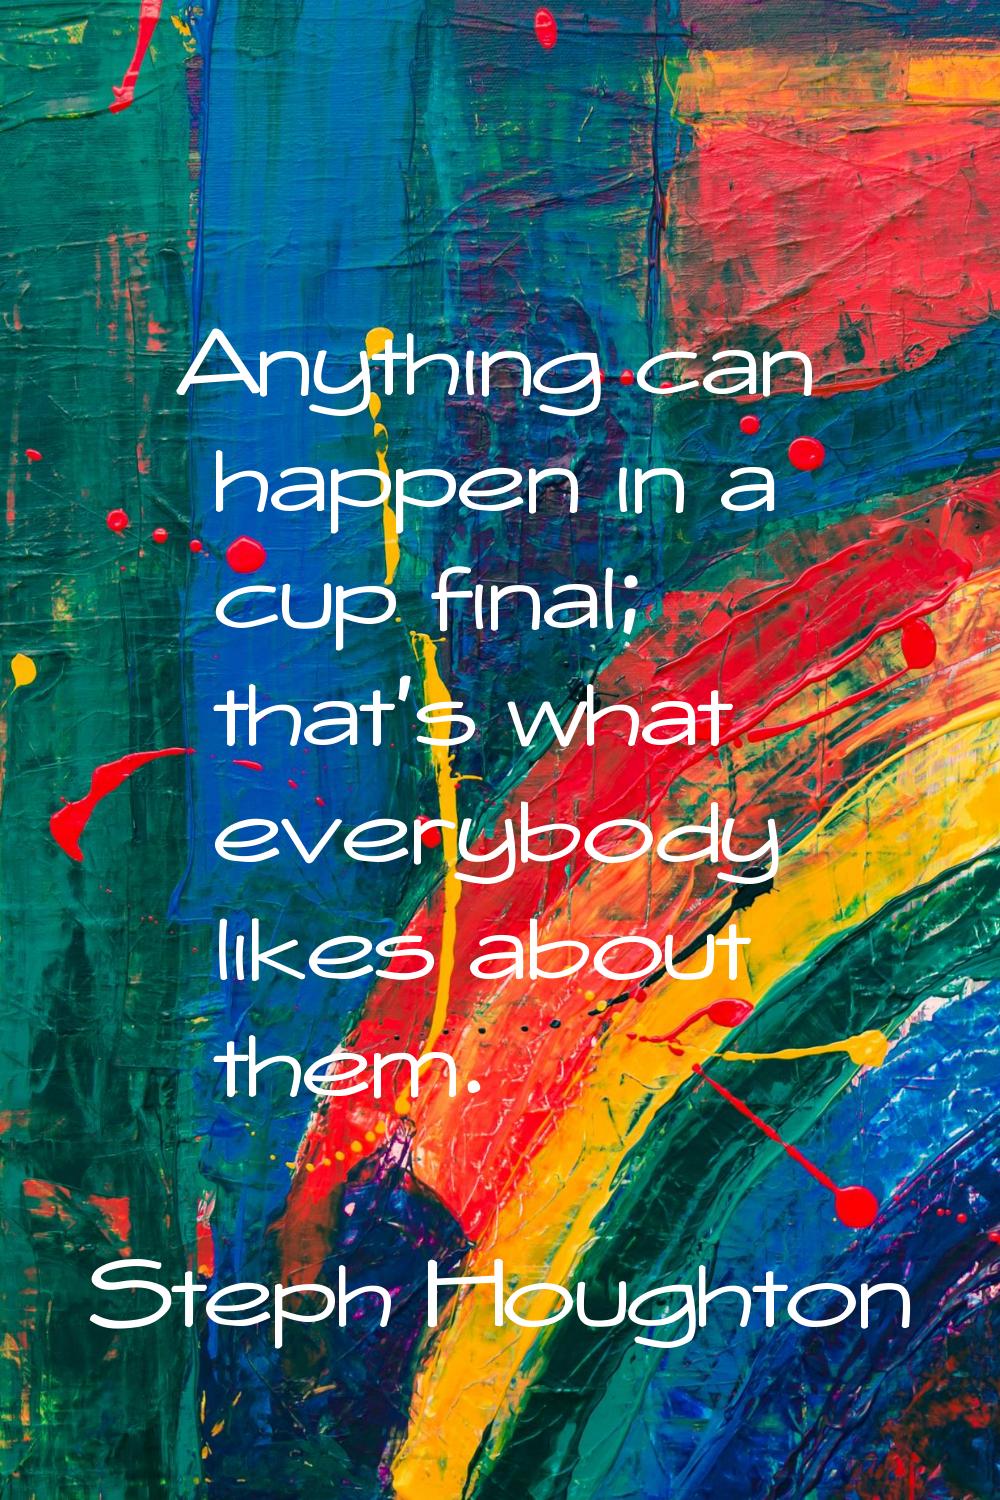 Anything can happen in a cup final; that's what everybody likes about them.